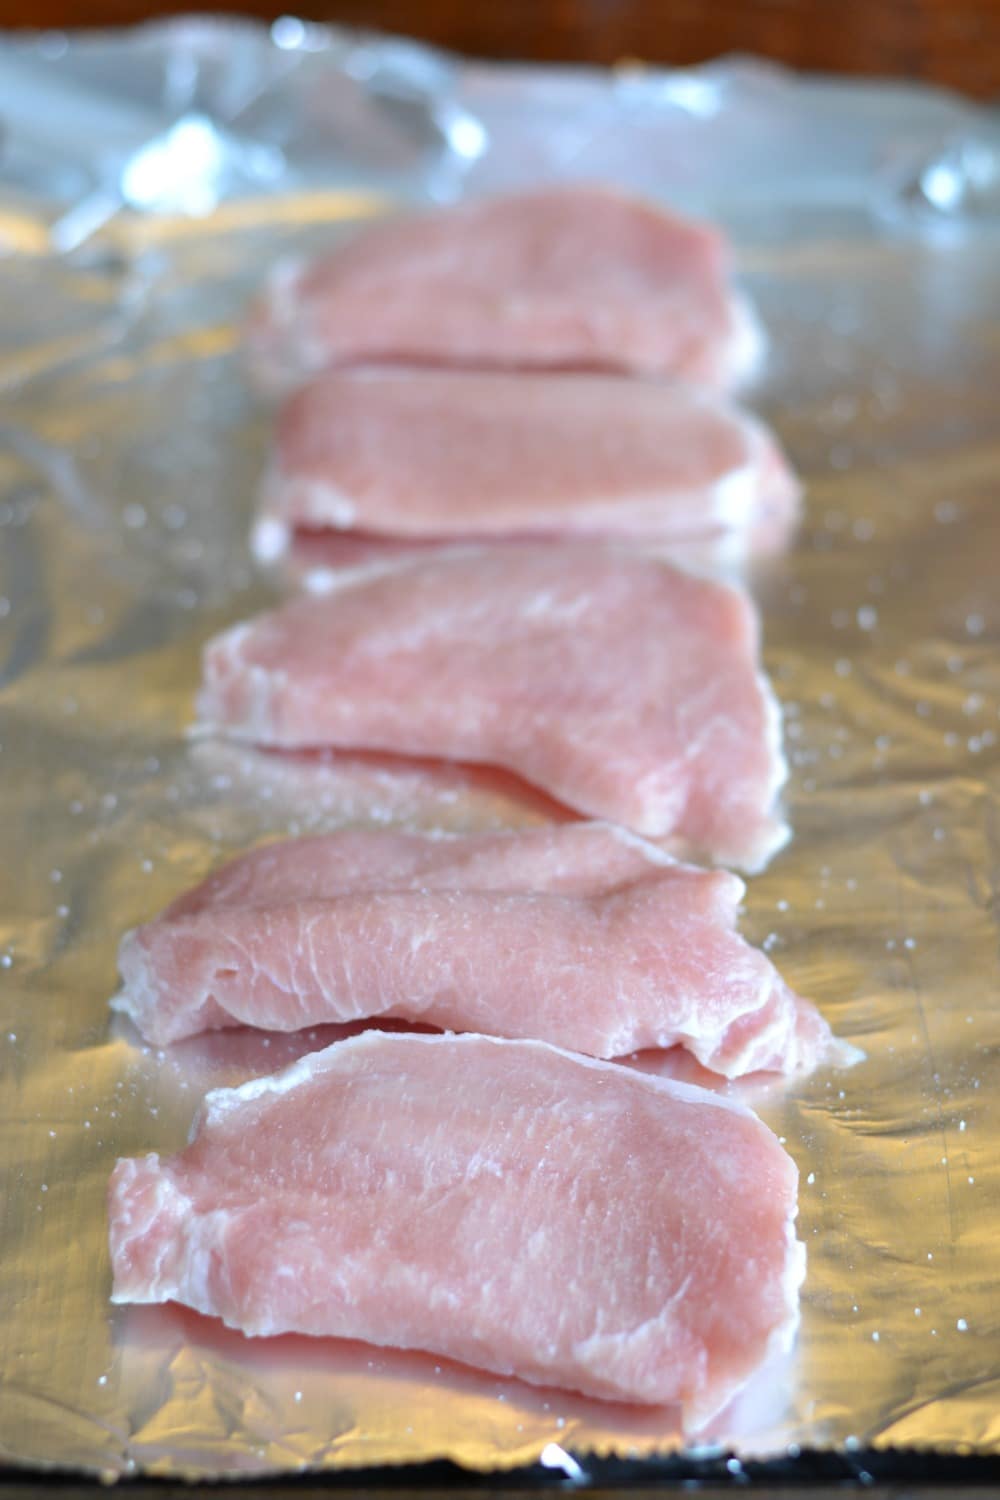 Uncooked pork chops on a baking sheet